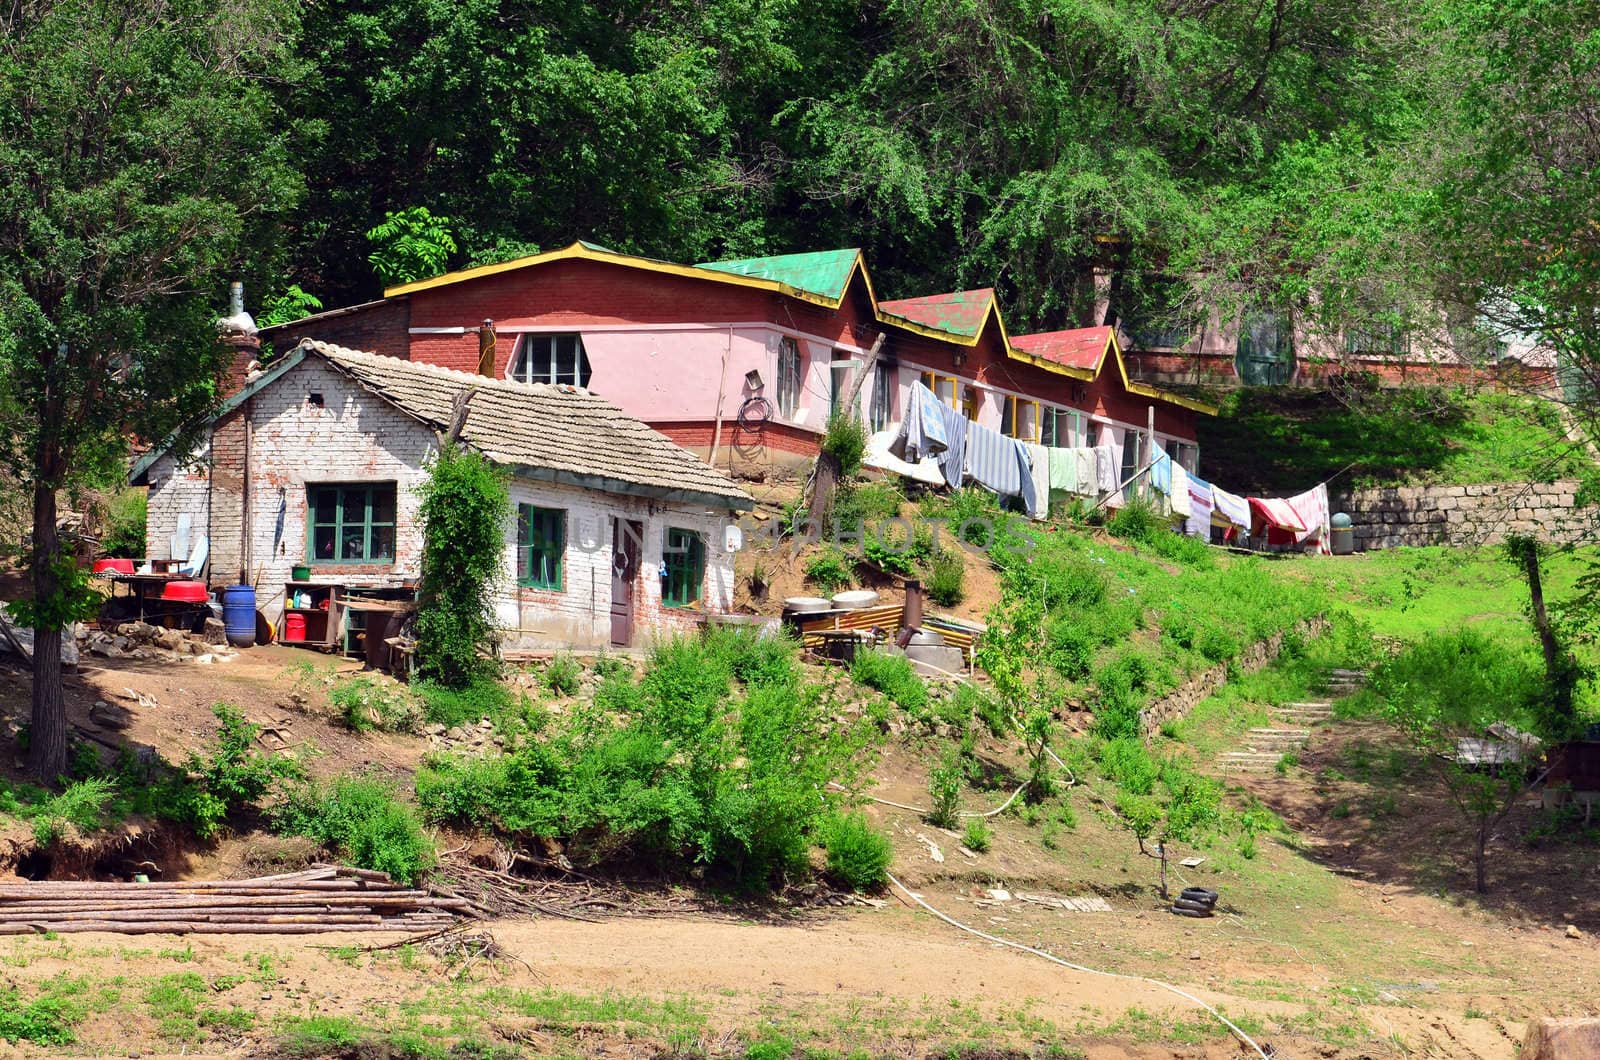 Poor chinese village in Jilin province